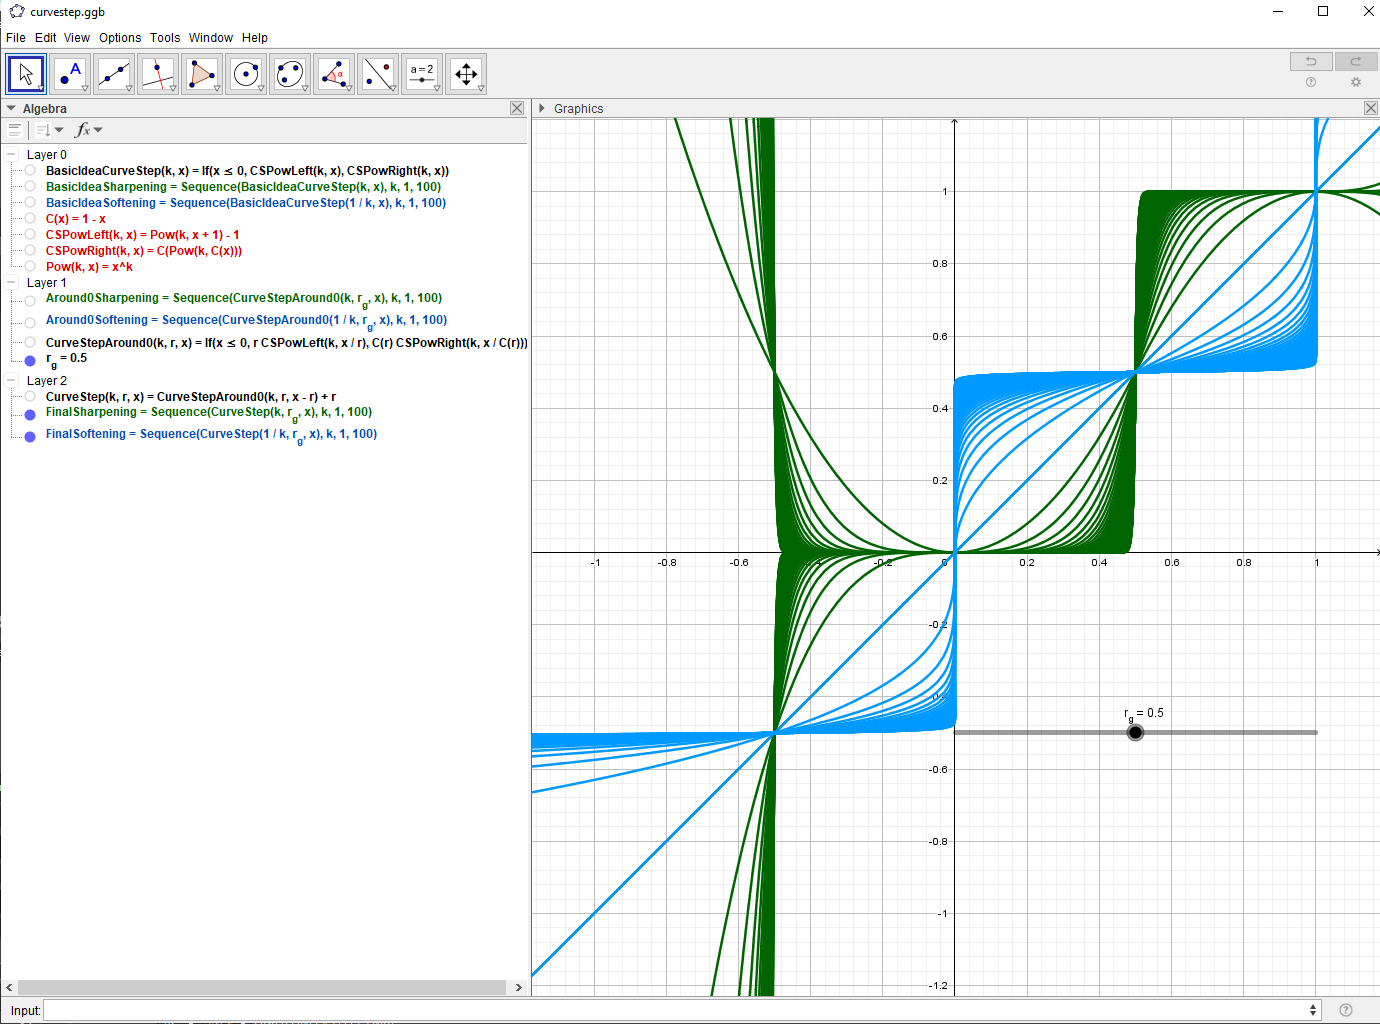 Visualization with Geogebra of a family of curves generated with the function CurveStep, r = 0.5